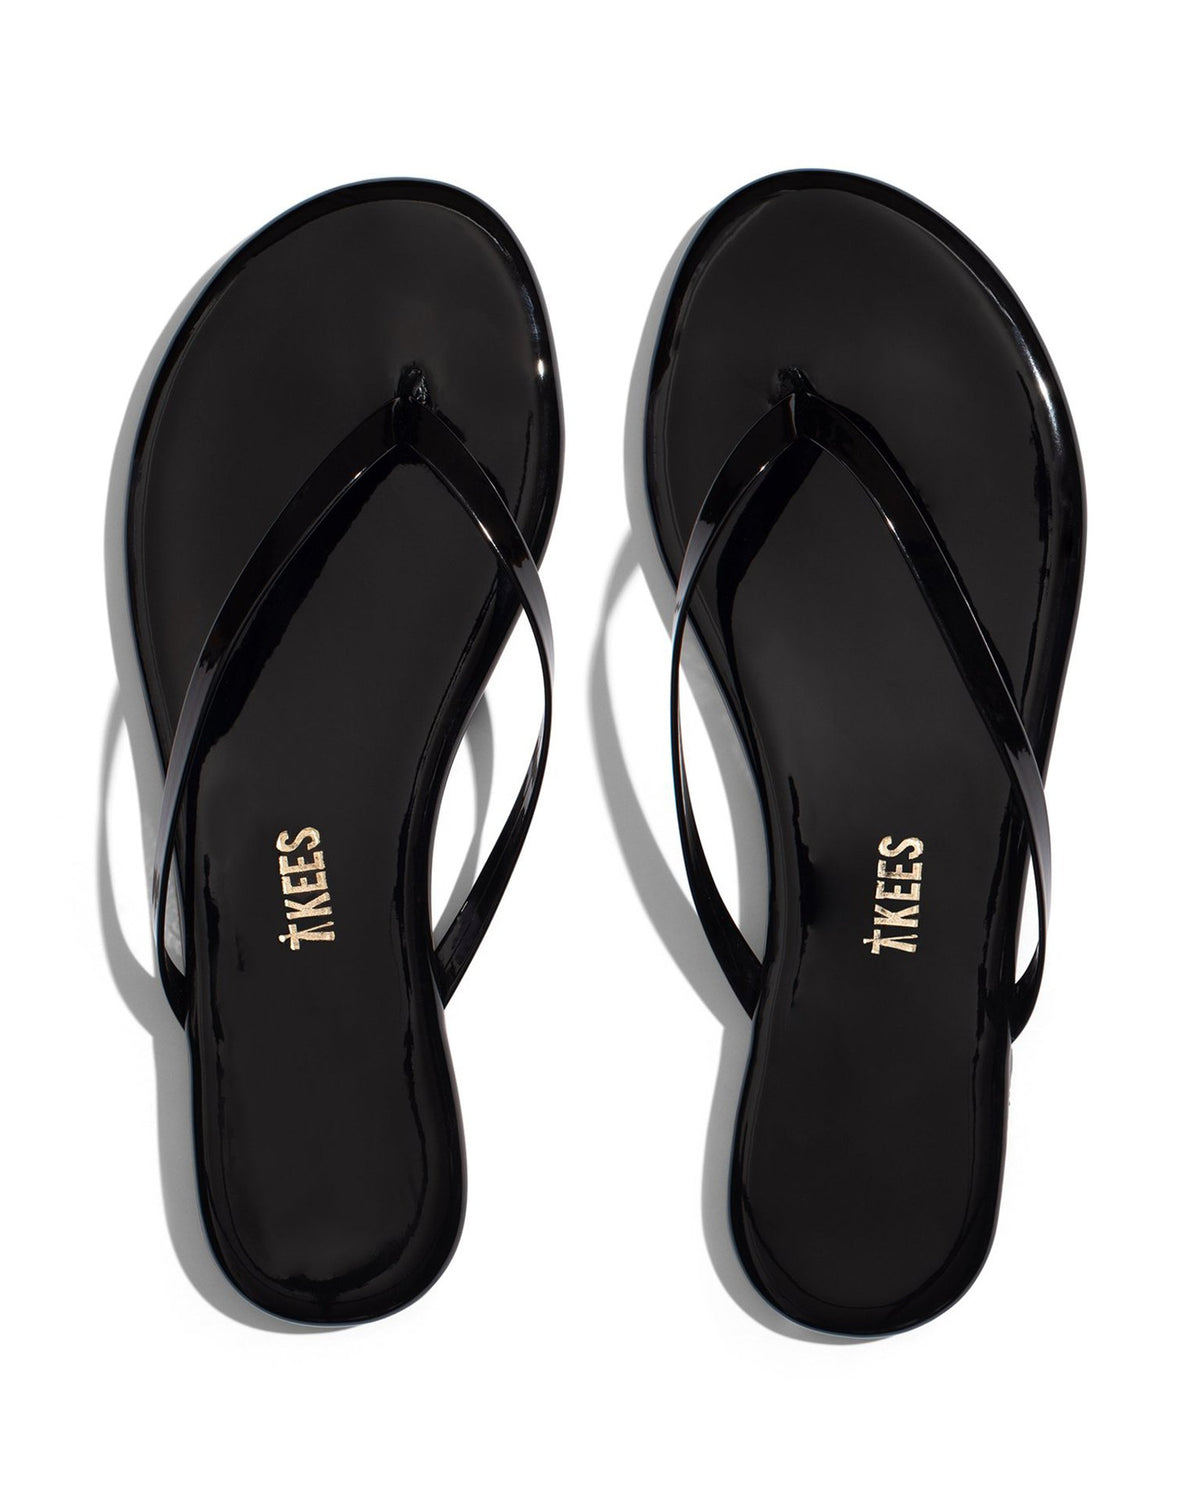 Tkees Shoes Glosses Flip Flop in Licorice